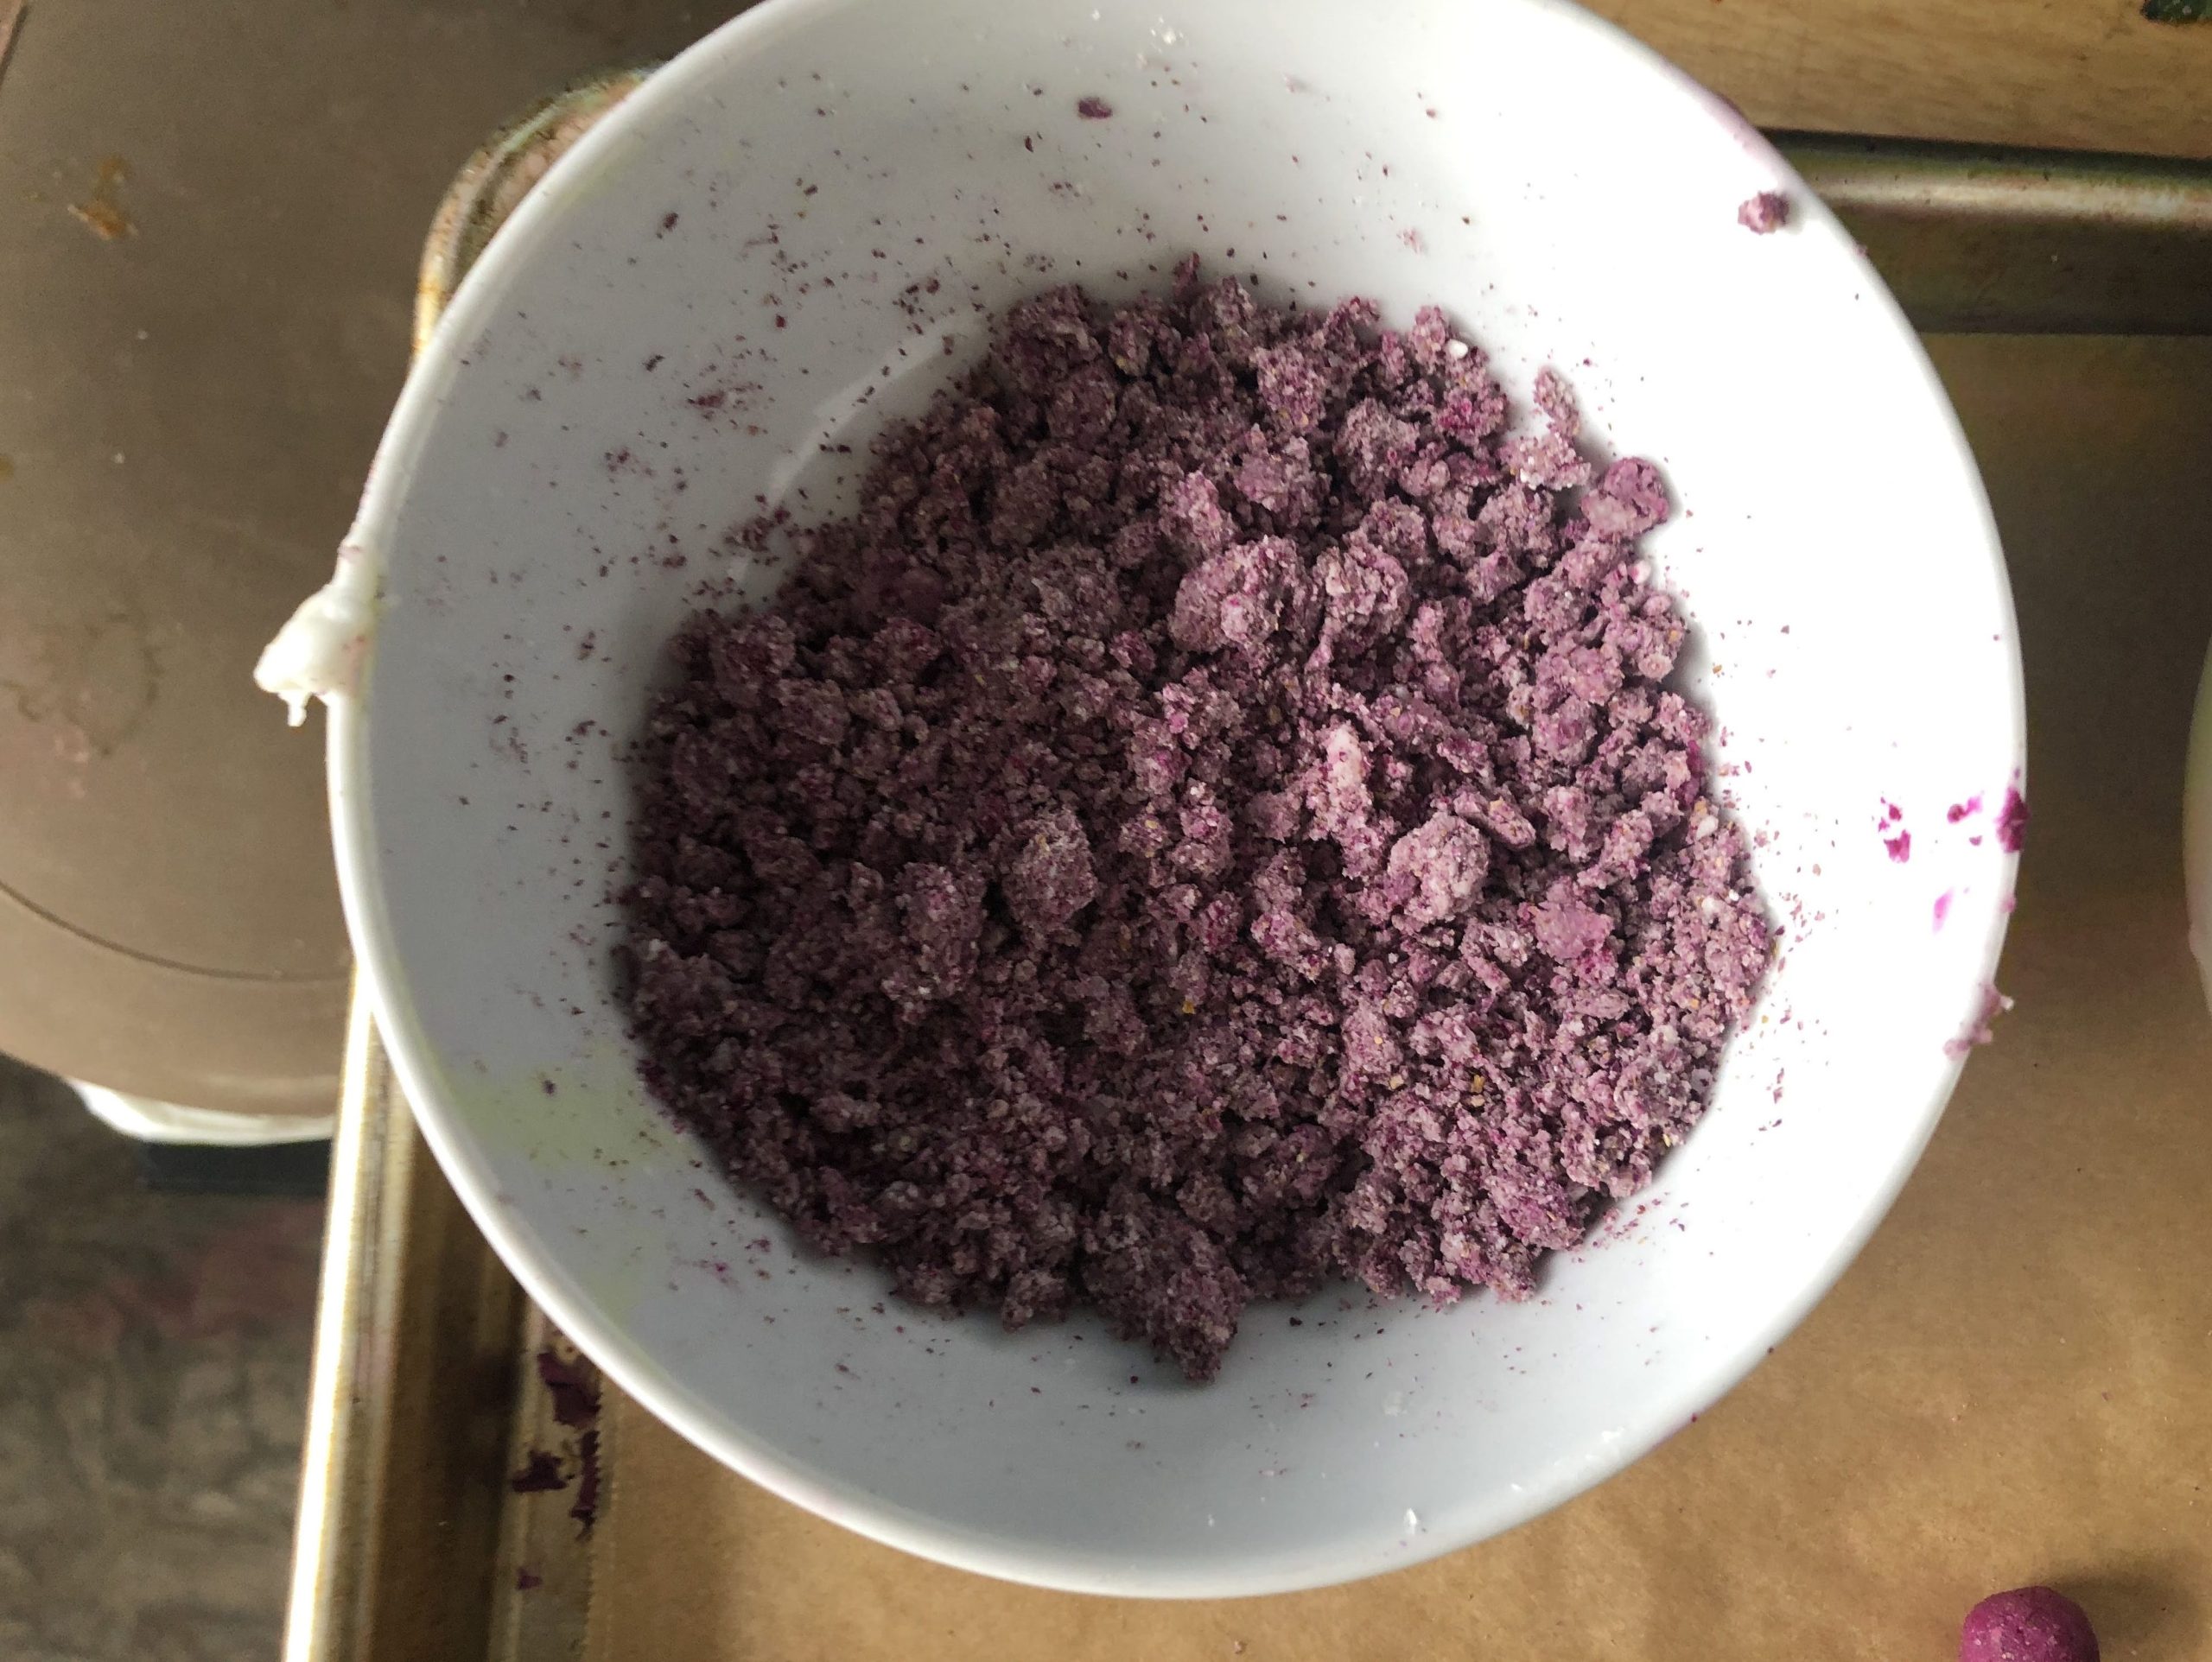 A white bowl full of clumps of something like wet purple sand